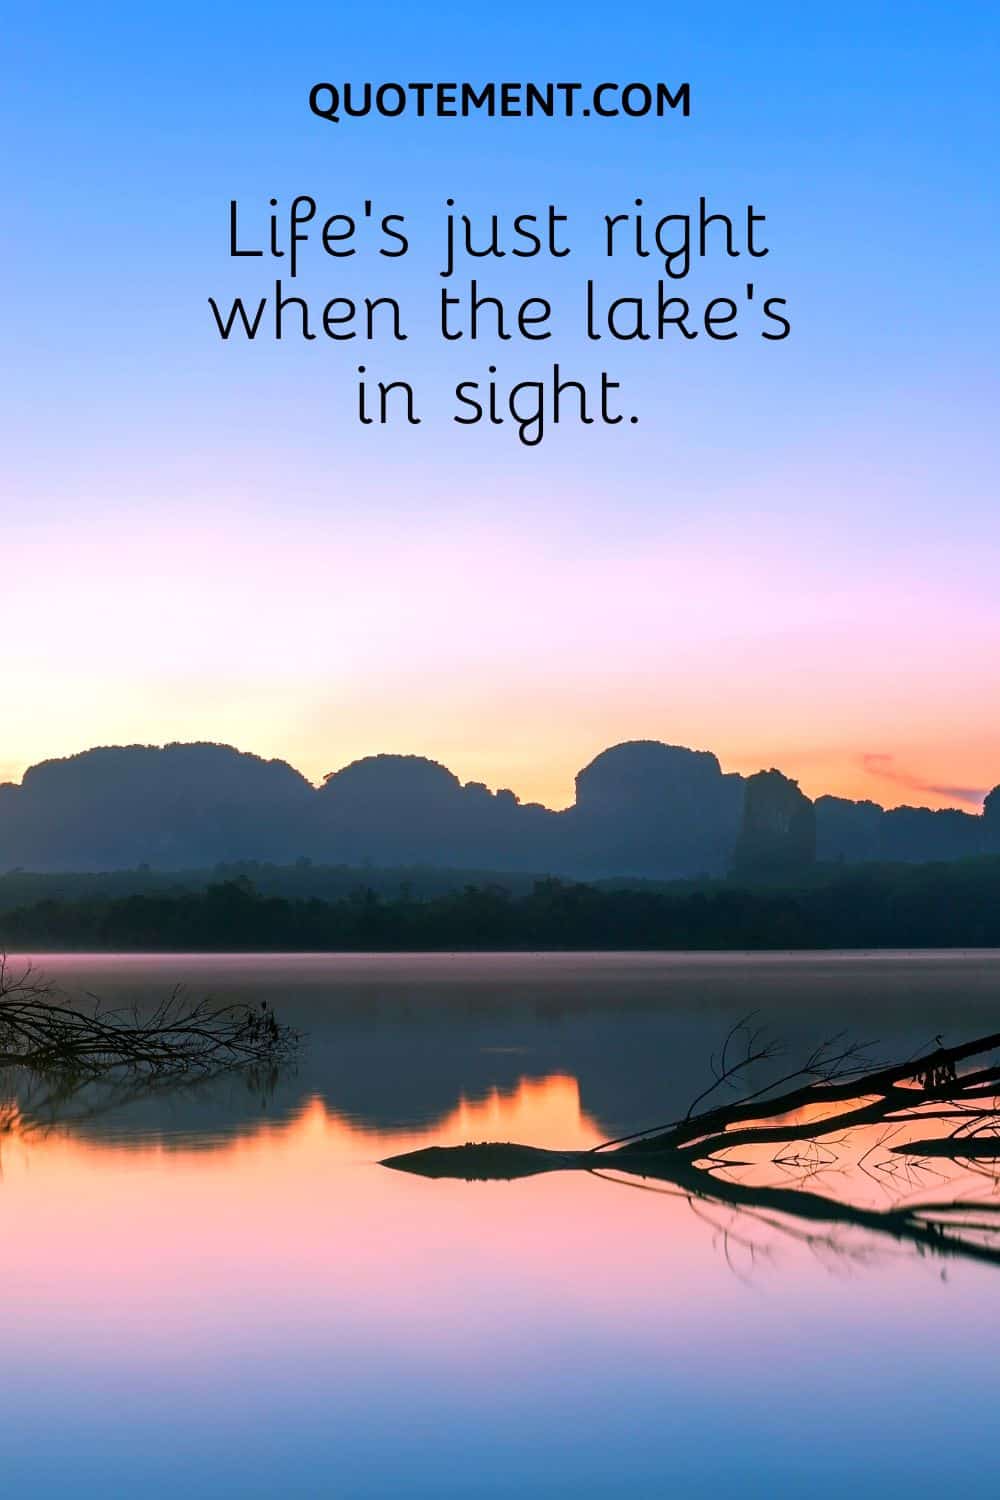 Life’s just right when the lake’s in sight.